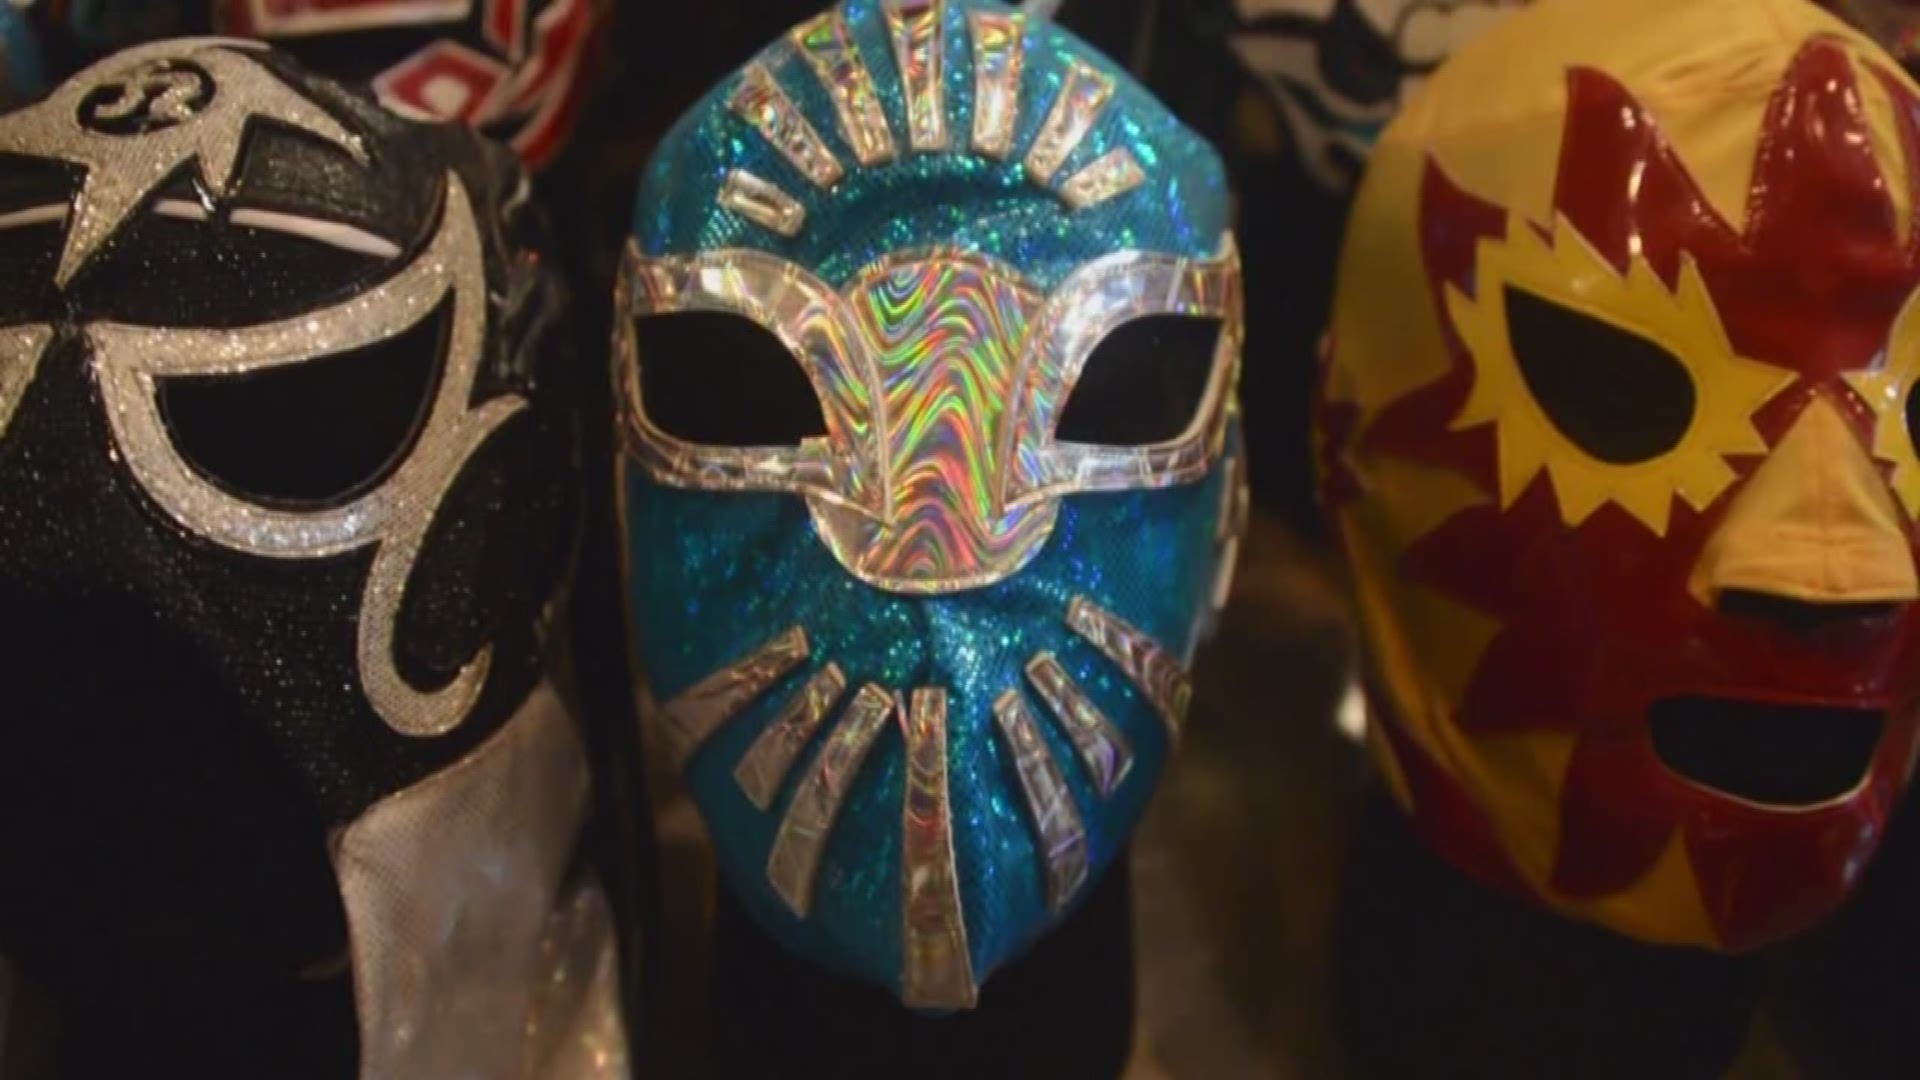 Looking for something fun and different to do? A new Mexican professional wrestling-themed bar just opened in San Antonio.